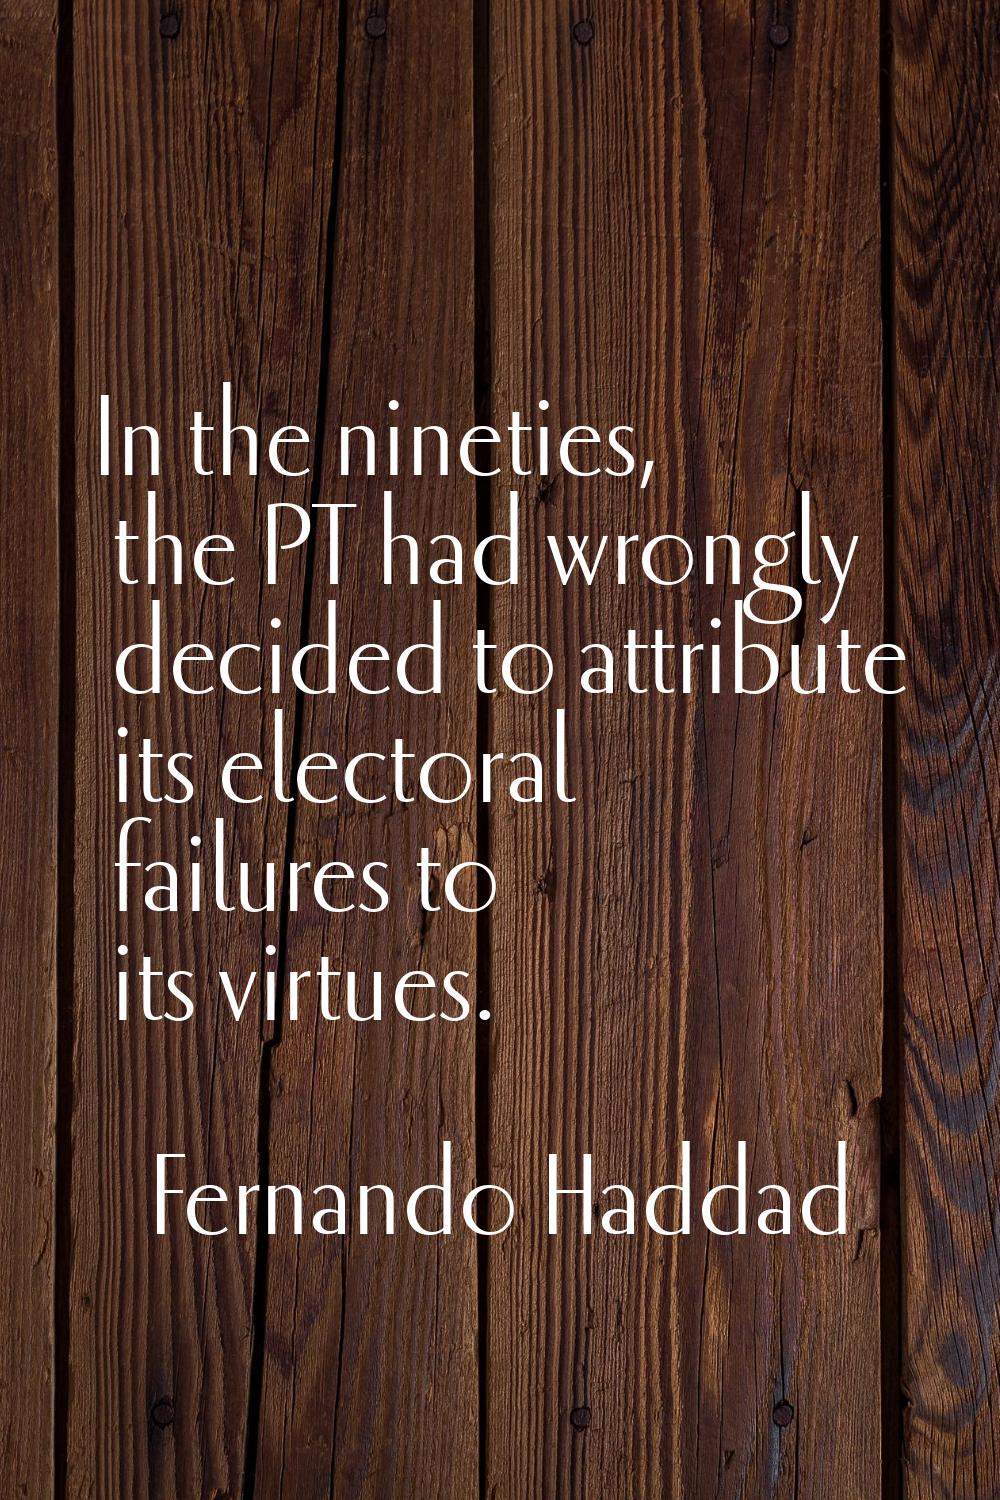 In the nineties, the PT had wrongly decided to attribute its electoral failures to its virtues.